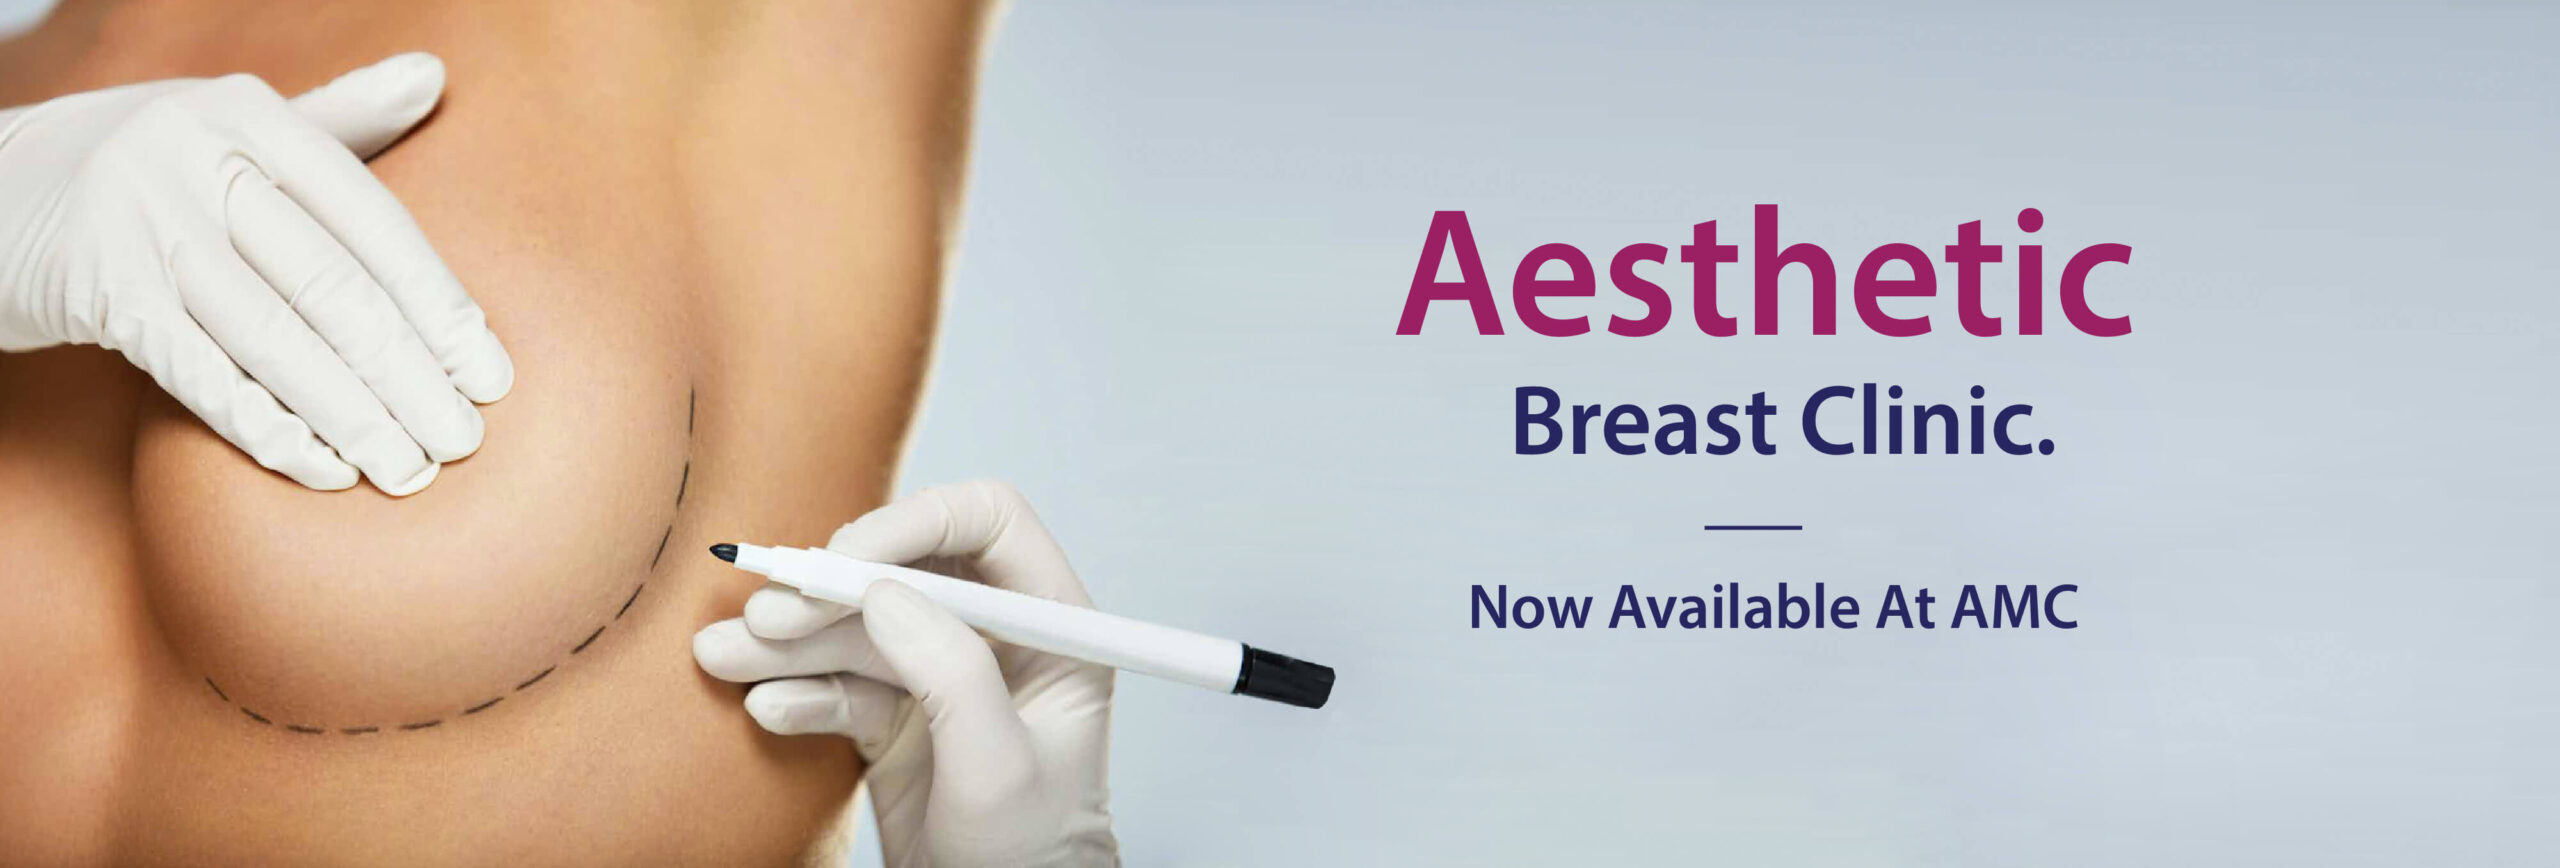 Aesthetic Breast Clinic now available at AMC-13-13